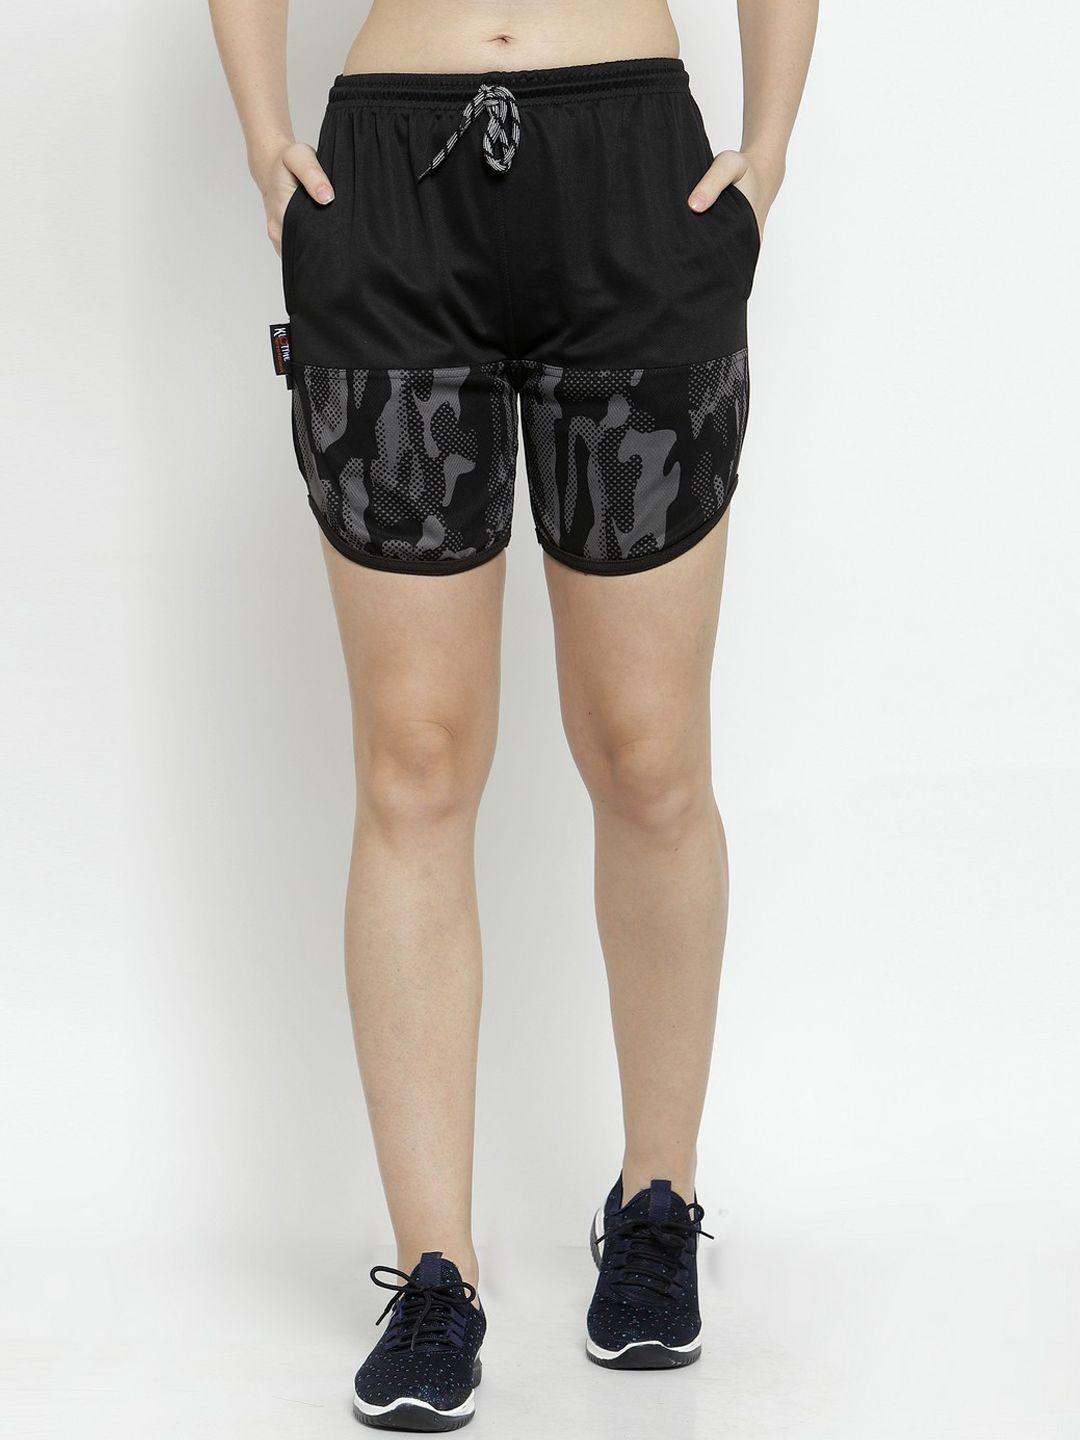 klotthe women camoufllage printed rapid-dry sports shorts